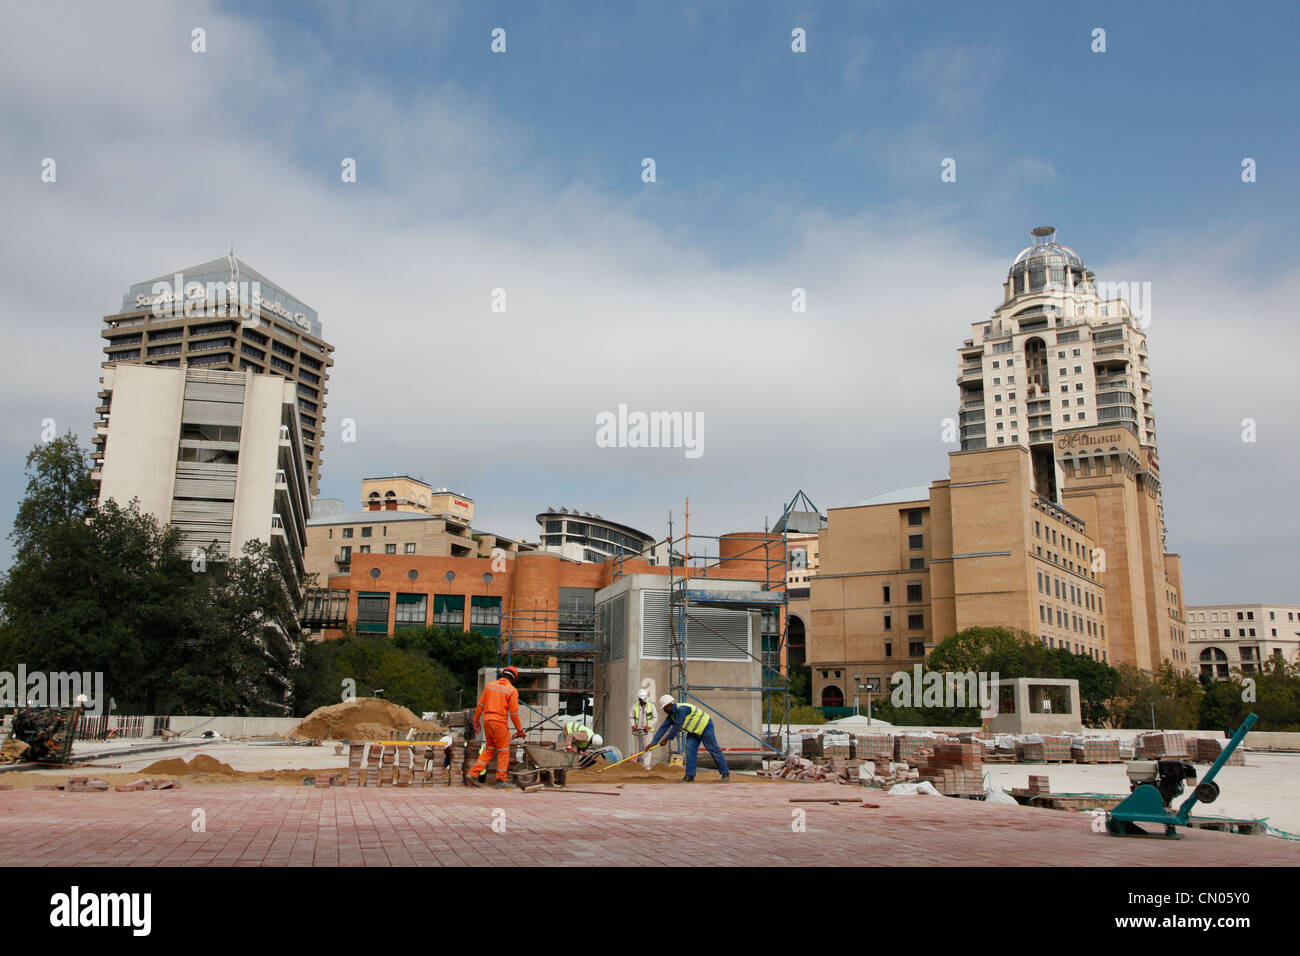 Construction of booming businesses in South Africa's richest area Sandton creates employment for many. South Africa Stock Photo